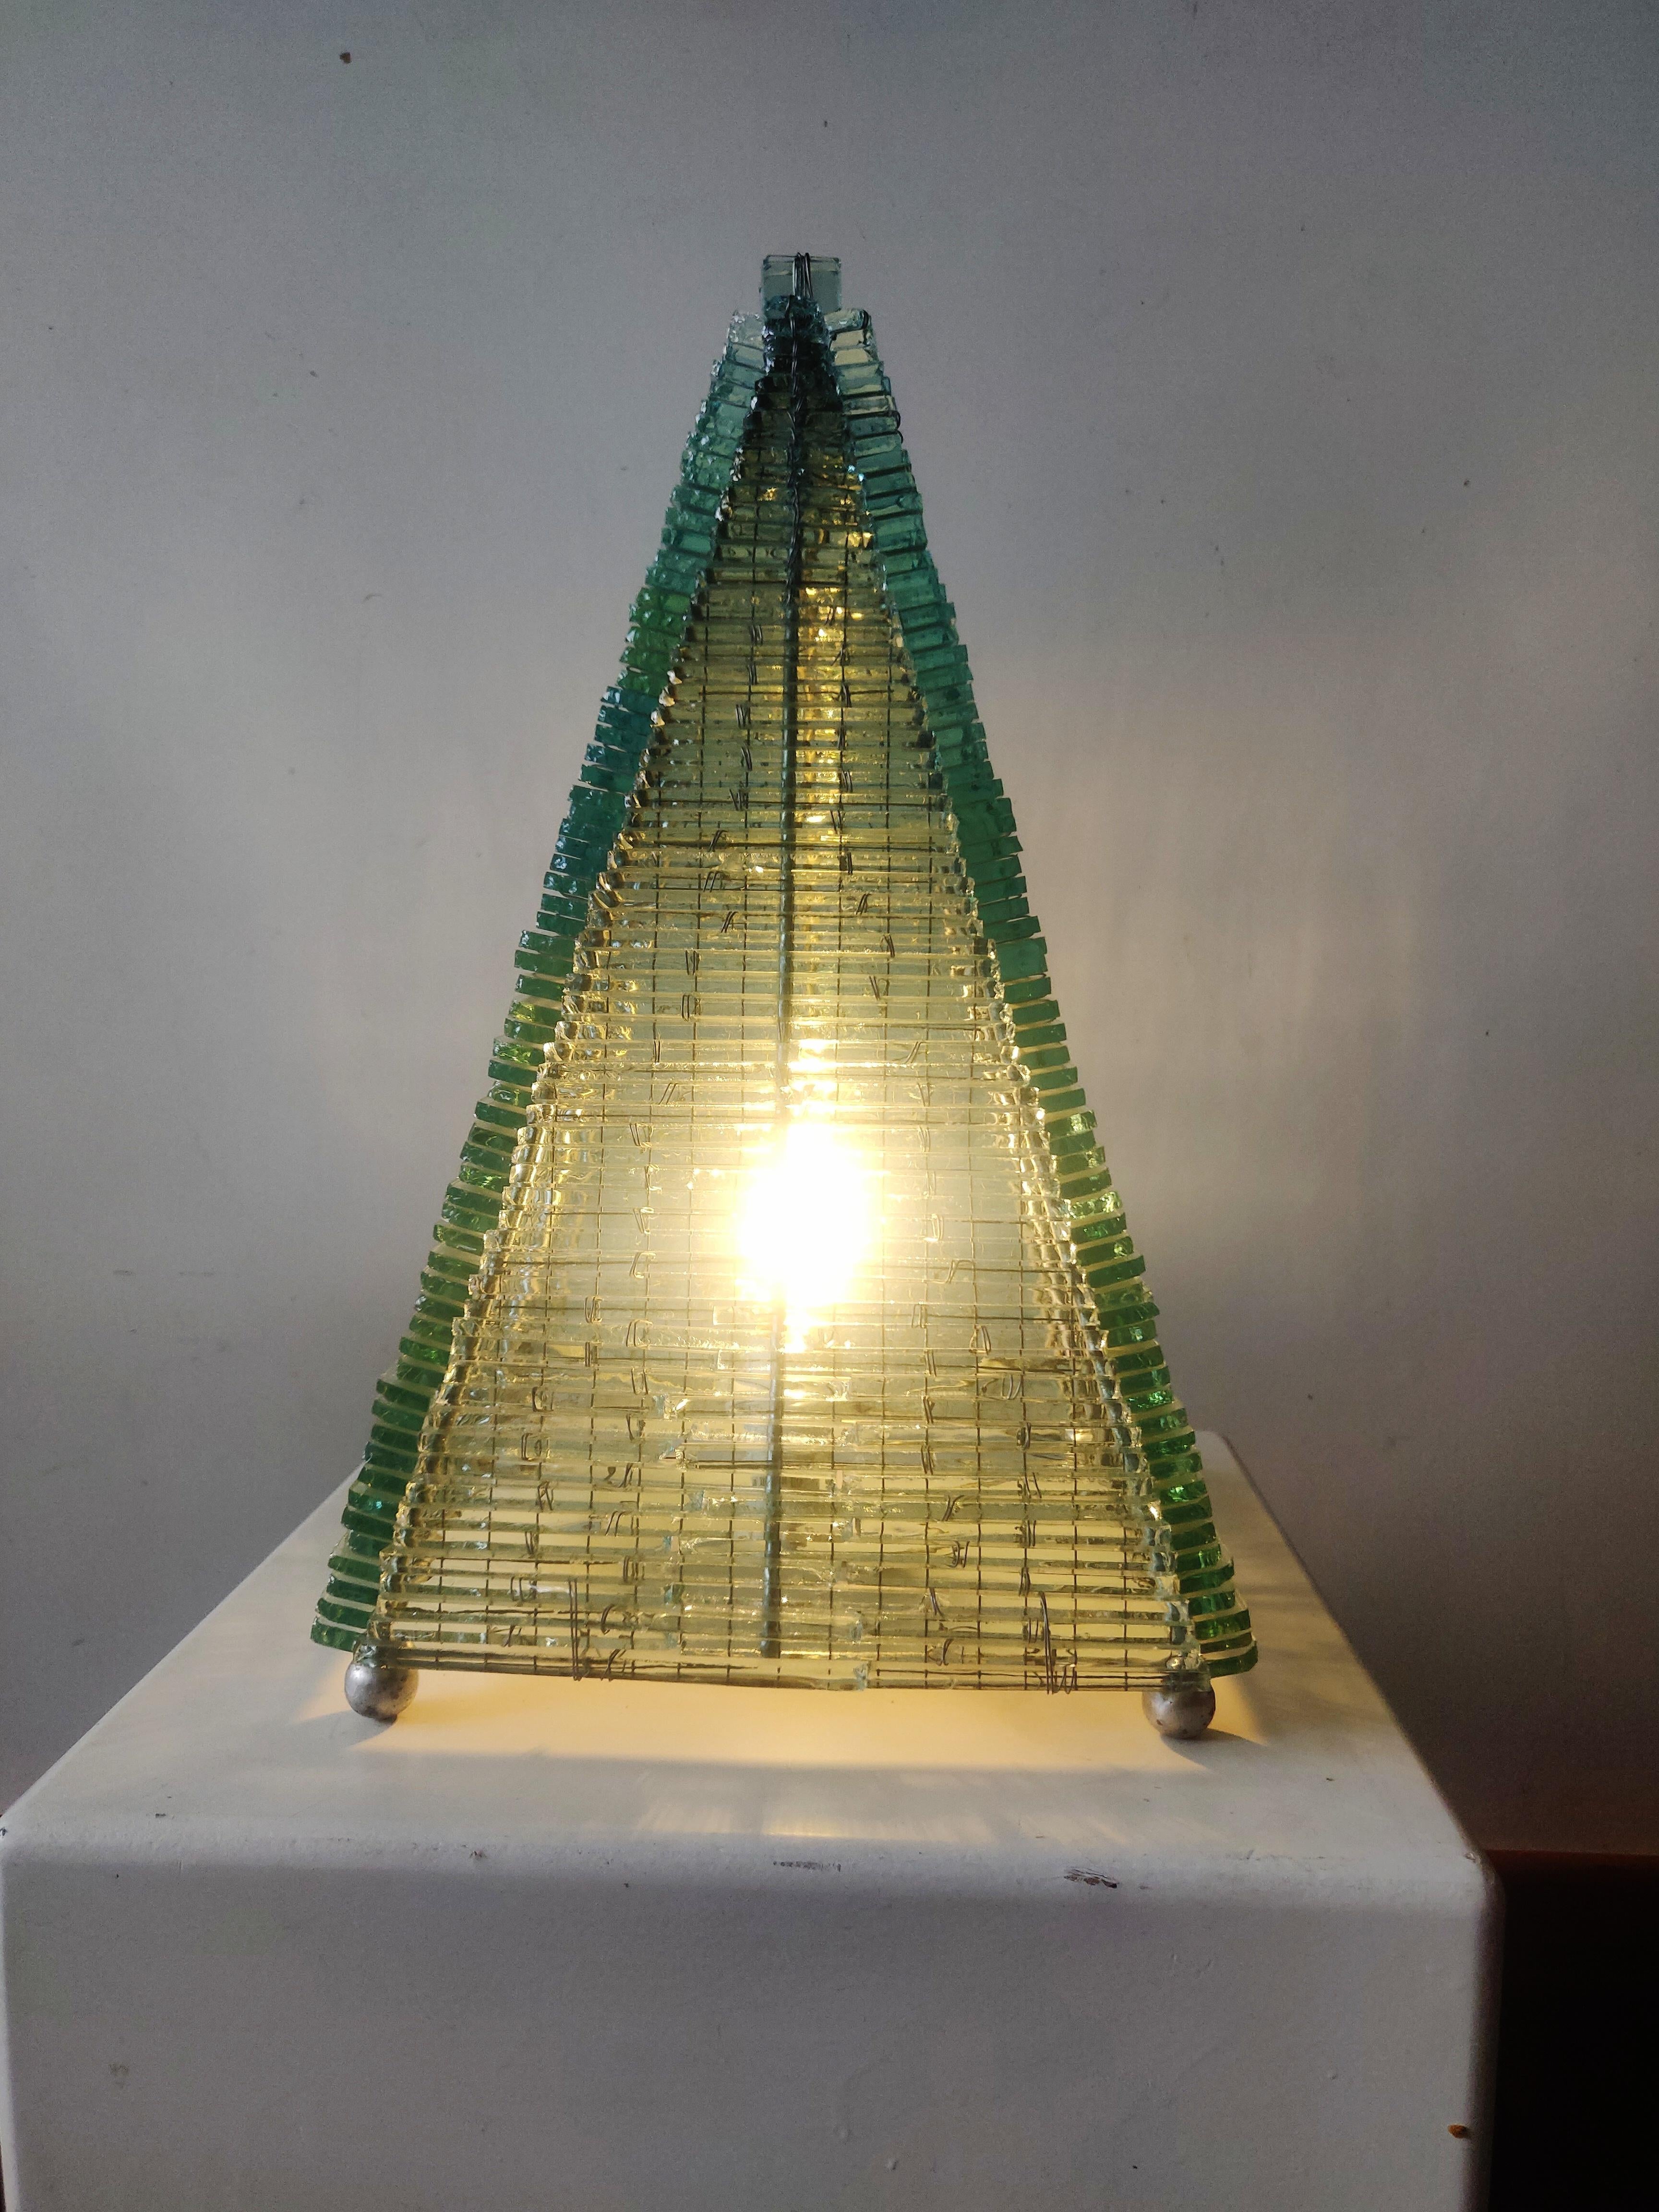 Vintage French Glass pyramid shaped table lamp. Multiple layers of pieces of glass built up in a pyramid shape, hand wired and rests on a metal frame dating from the 1970s 
Functions as a piece of sculpture as well as a table lamp. The green glass